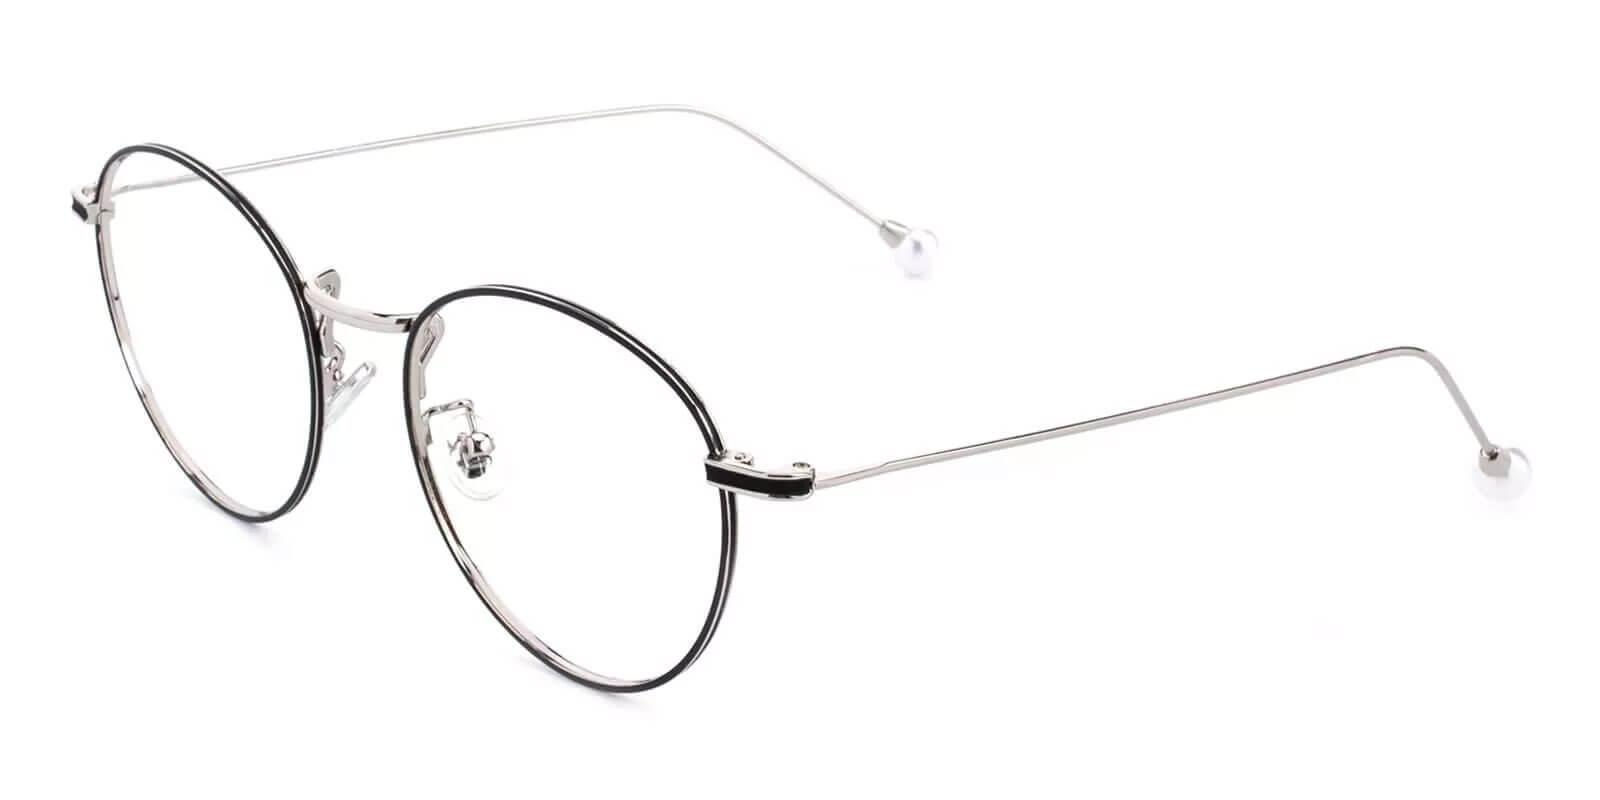 Pearl Silver Metal Eyeglasses , NosePads Frames from ABBE Glasses